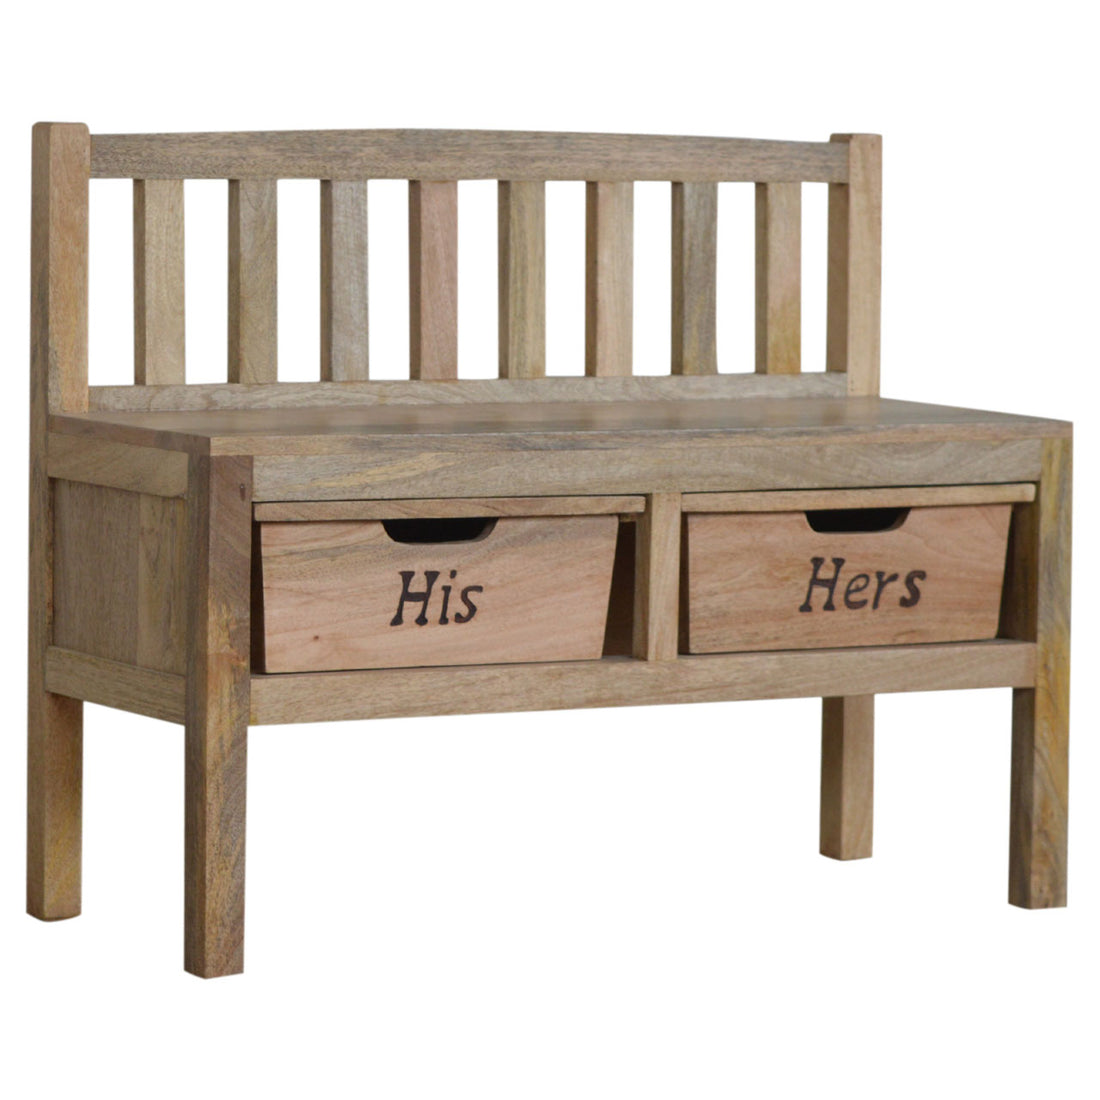 His & Hers Carved Storage Bench